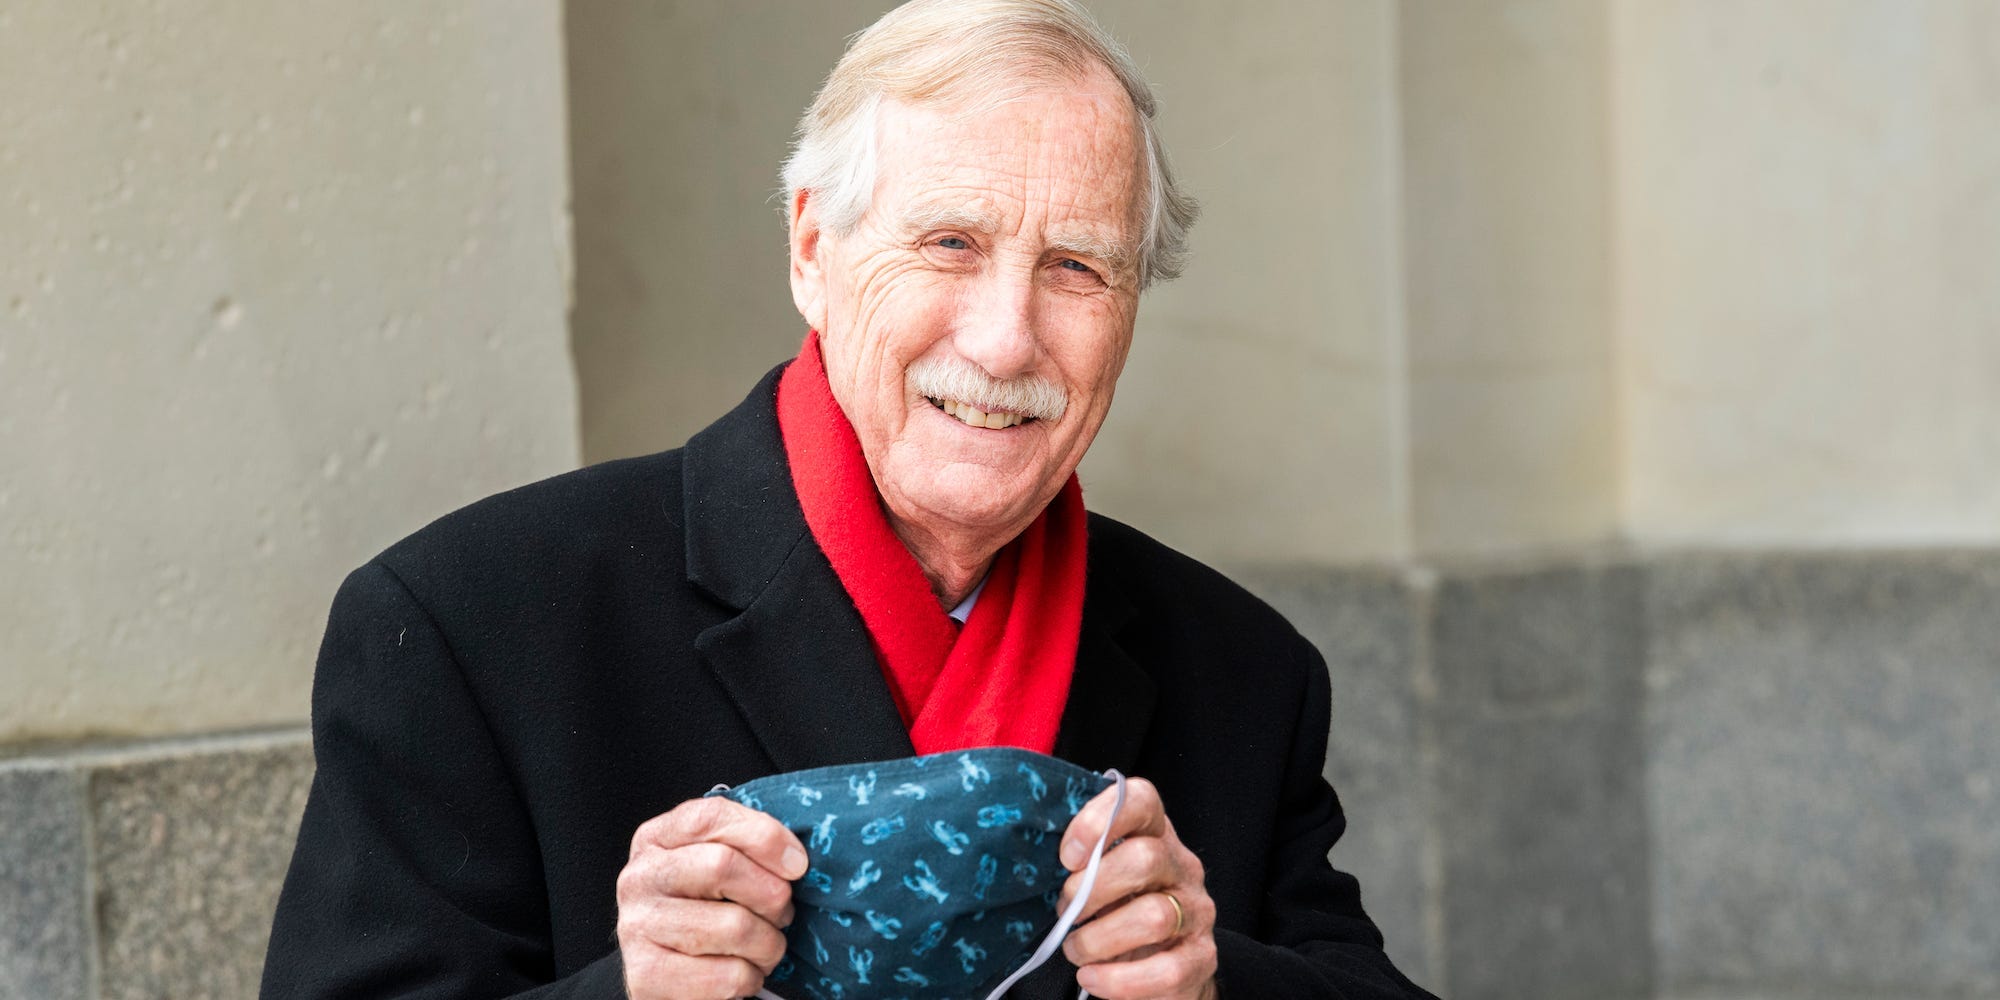 Independent Sen. Angus King of Maine shows off his lobster mask upon arriving to the Capitol on the fourth day of former President Donald Trump’s impeachment trial on Friday, February 12, 2021.